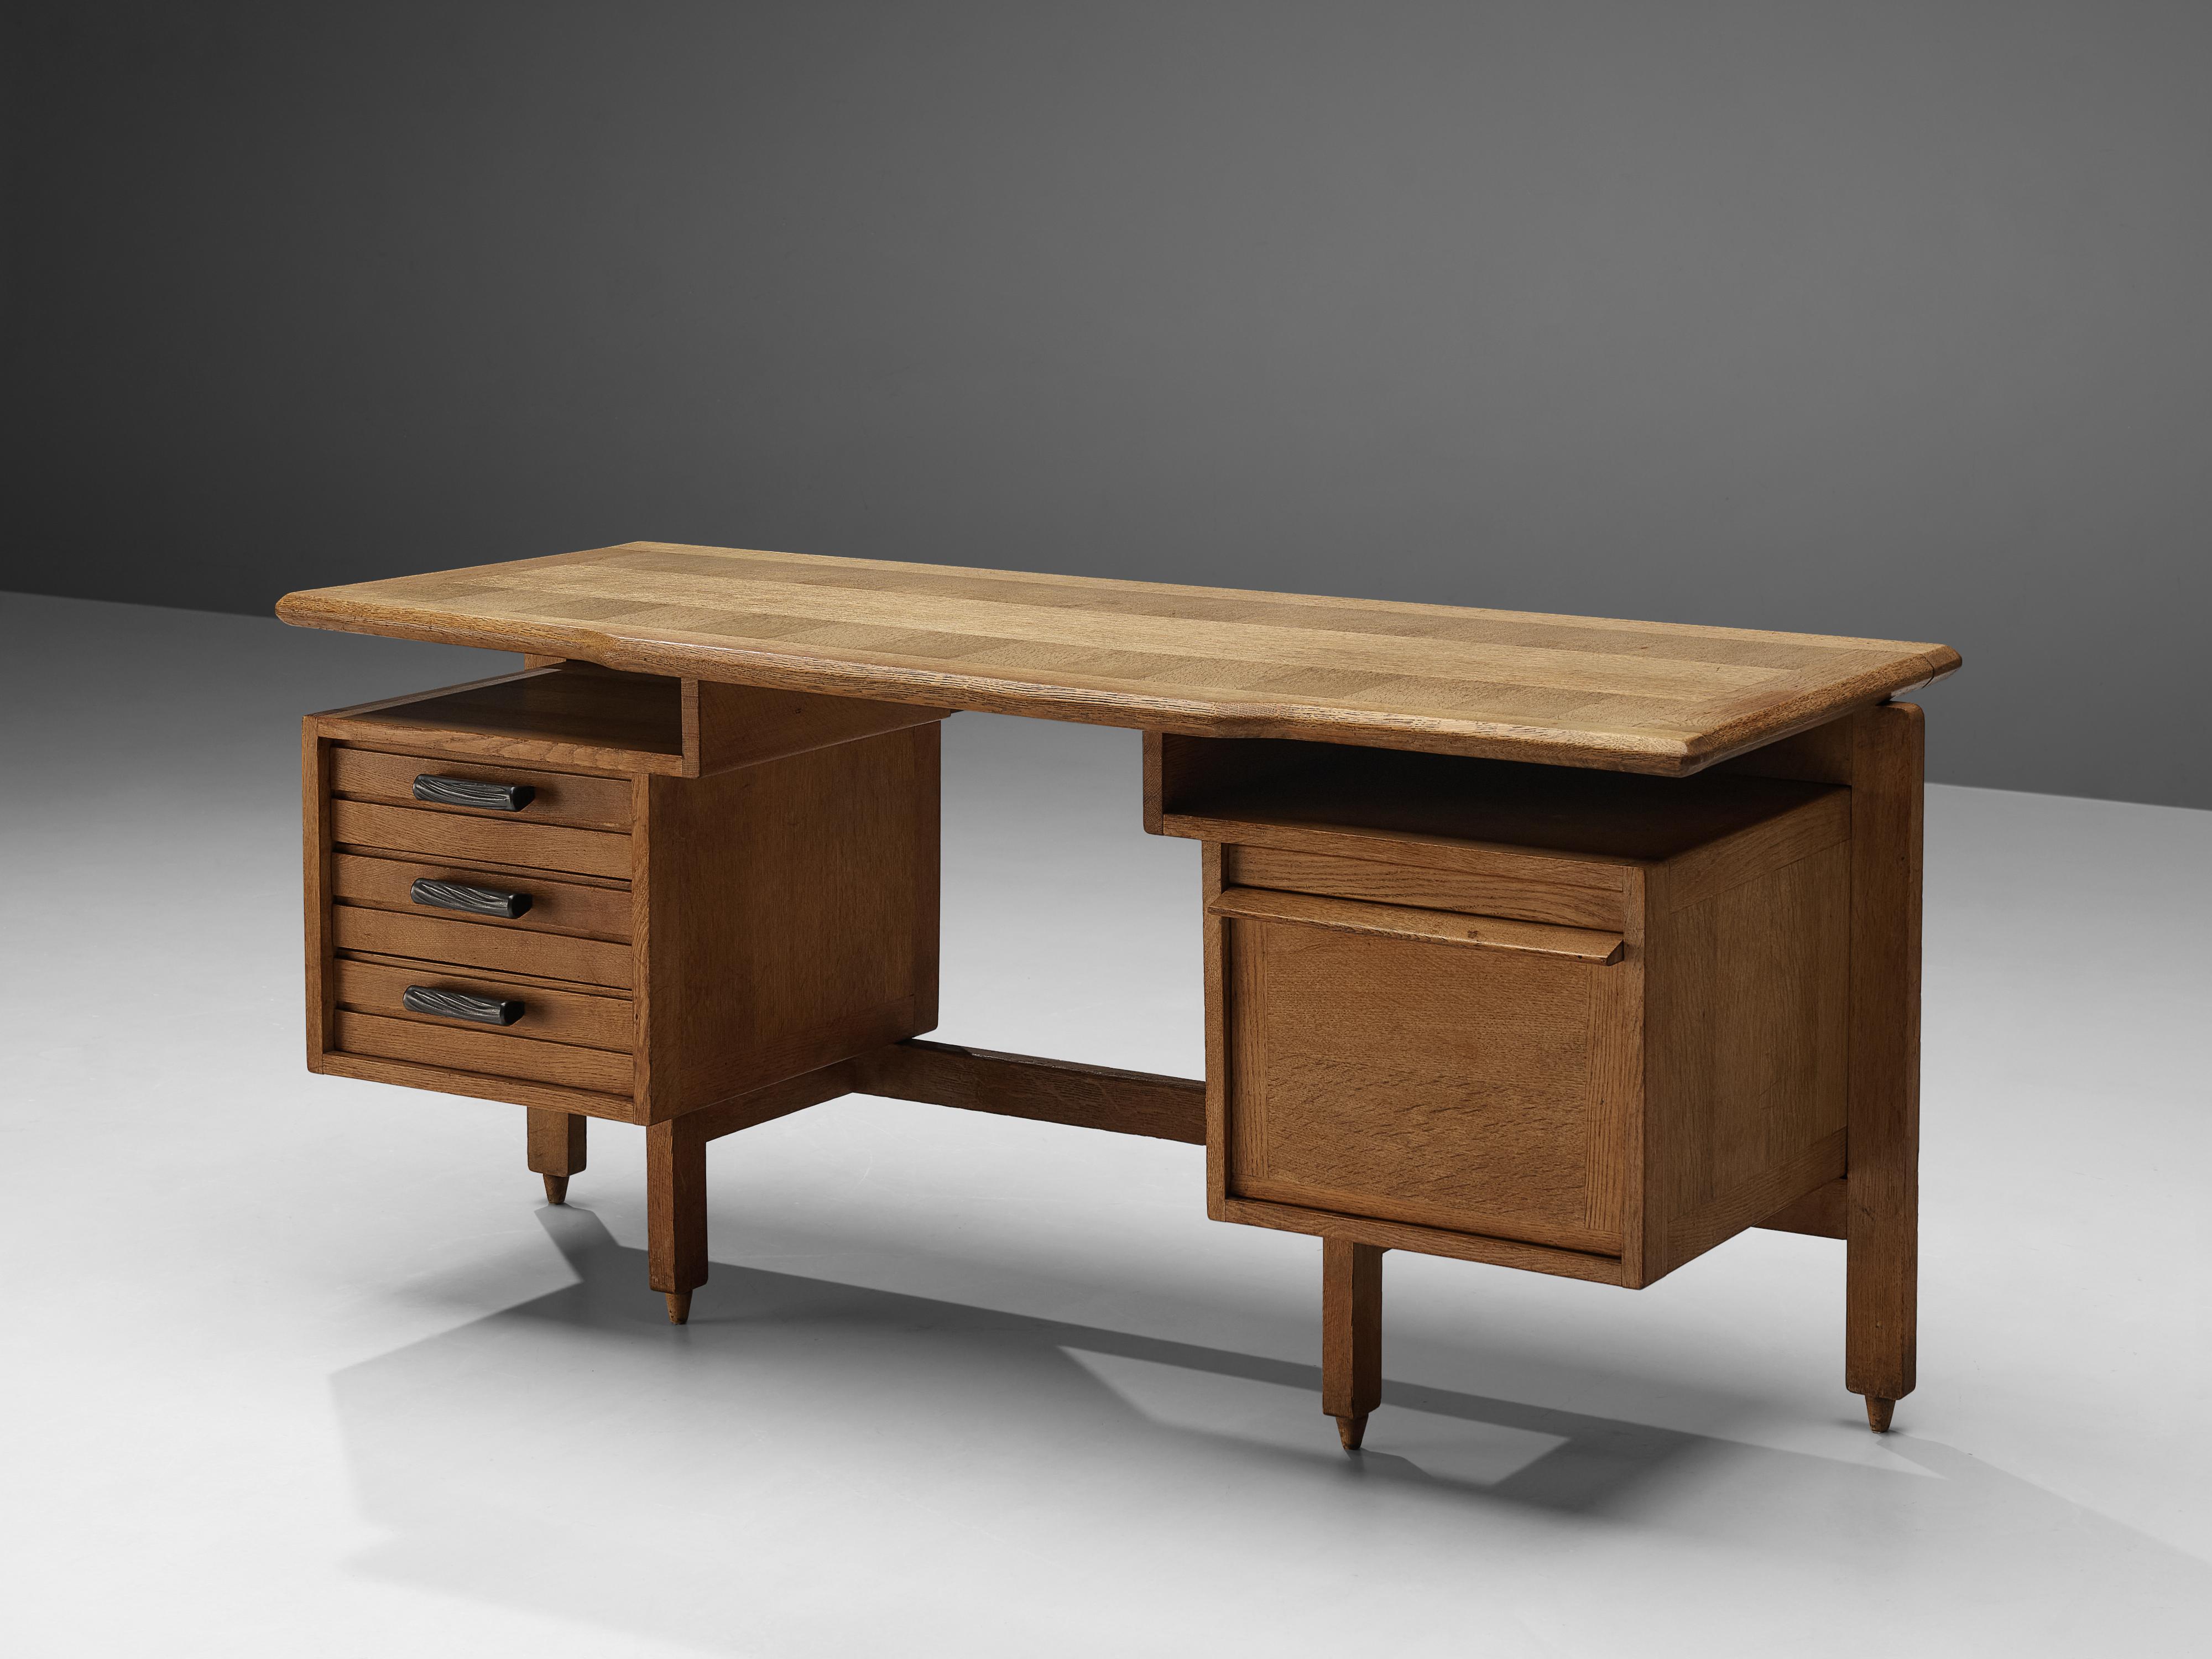 Guillerme et Chambron, desk, oak, France, 1950s

This desk has a large work surface and is equipped with storage space. Two compartments on both sides allow you to store your belongings. An open shelf between top and drawers can be used too. The